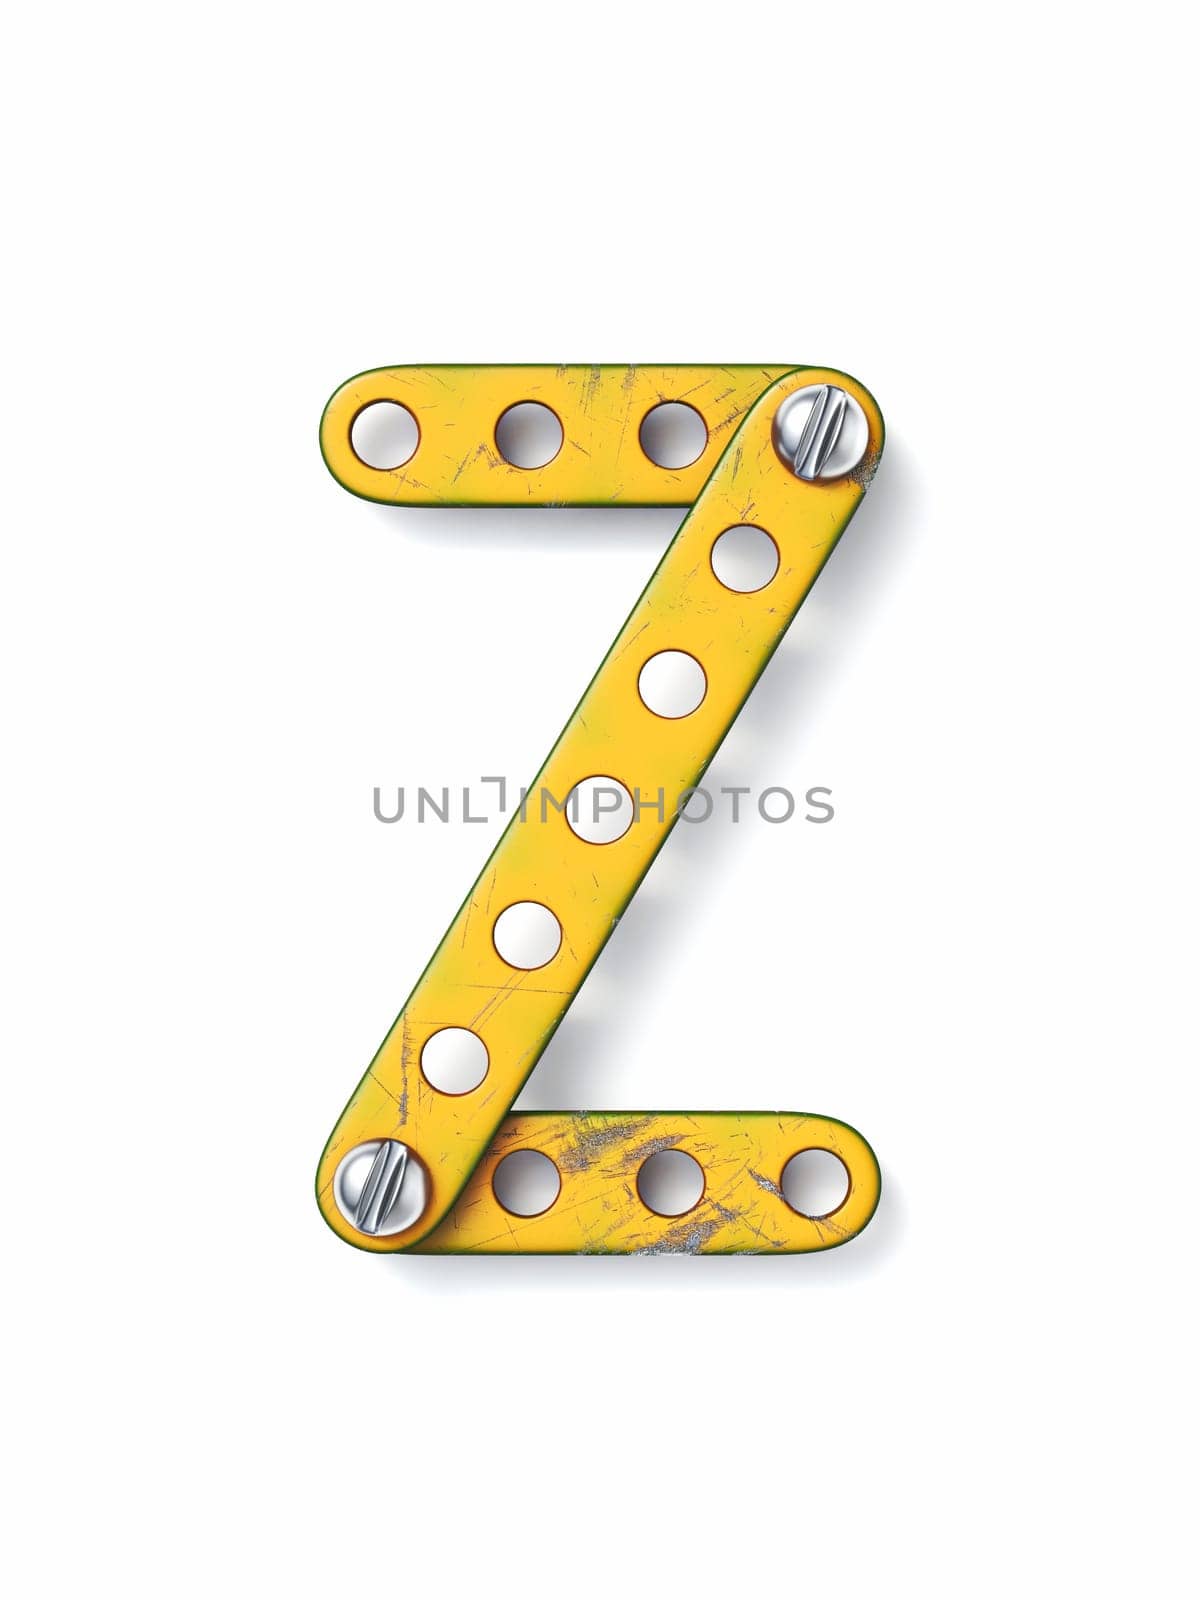 Aged yellow constructor font Letter Z 3D rendering illustration isolated on white background